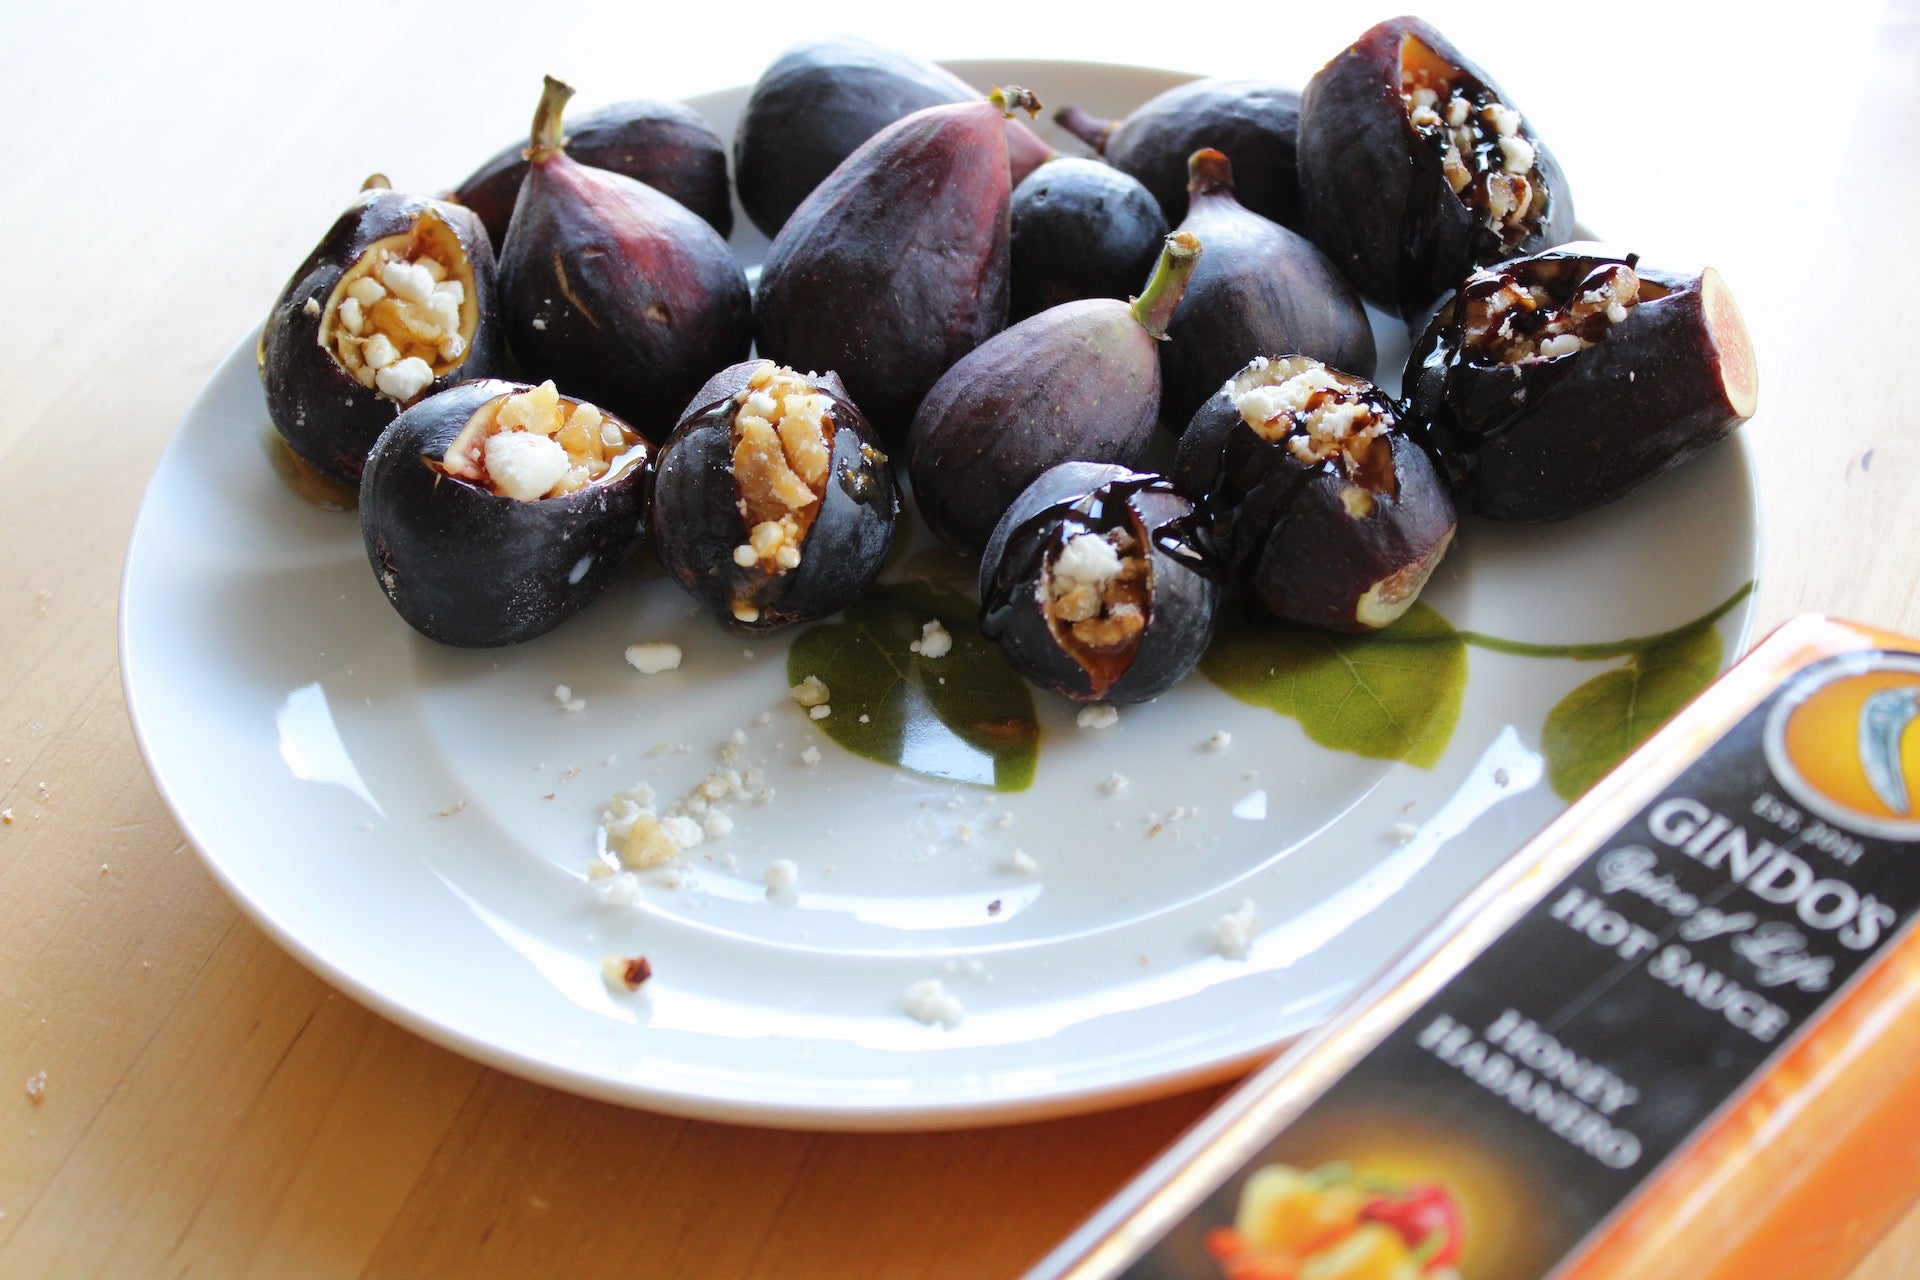 Gindo's Loaded Figs